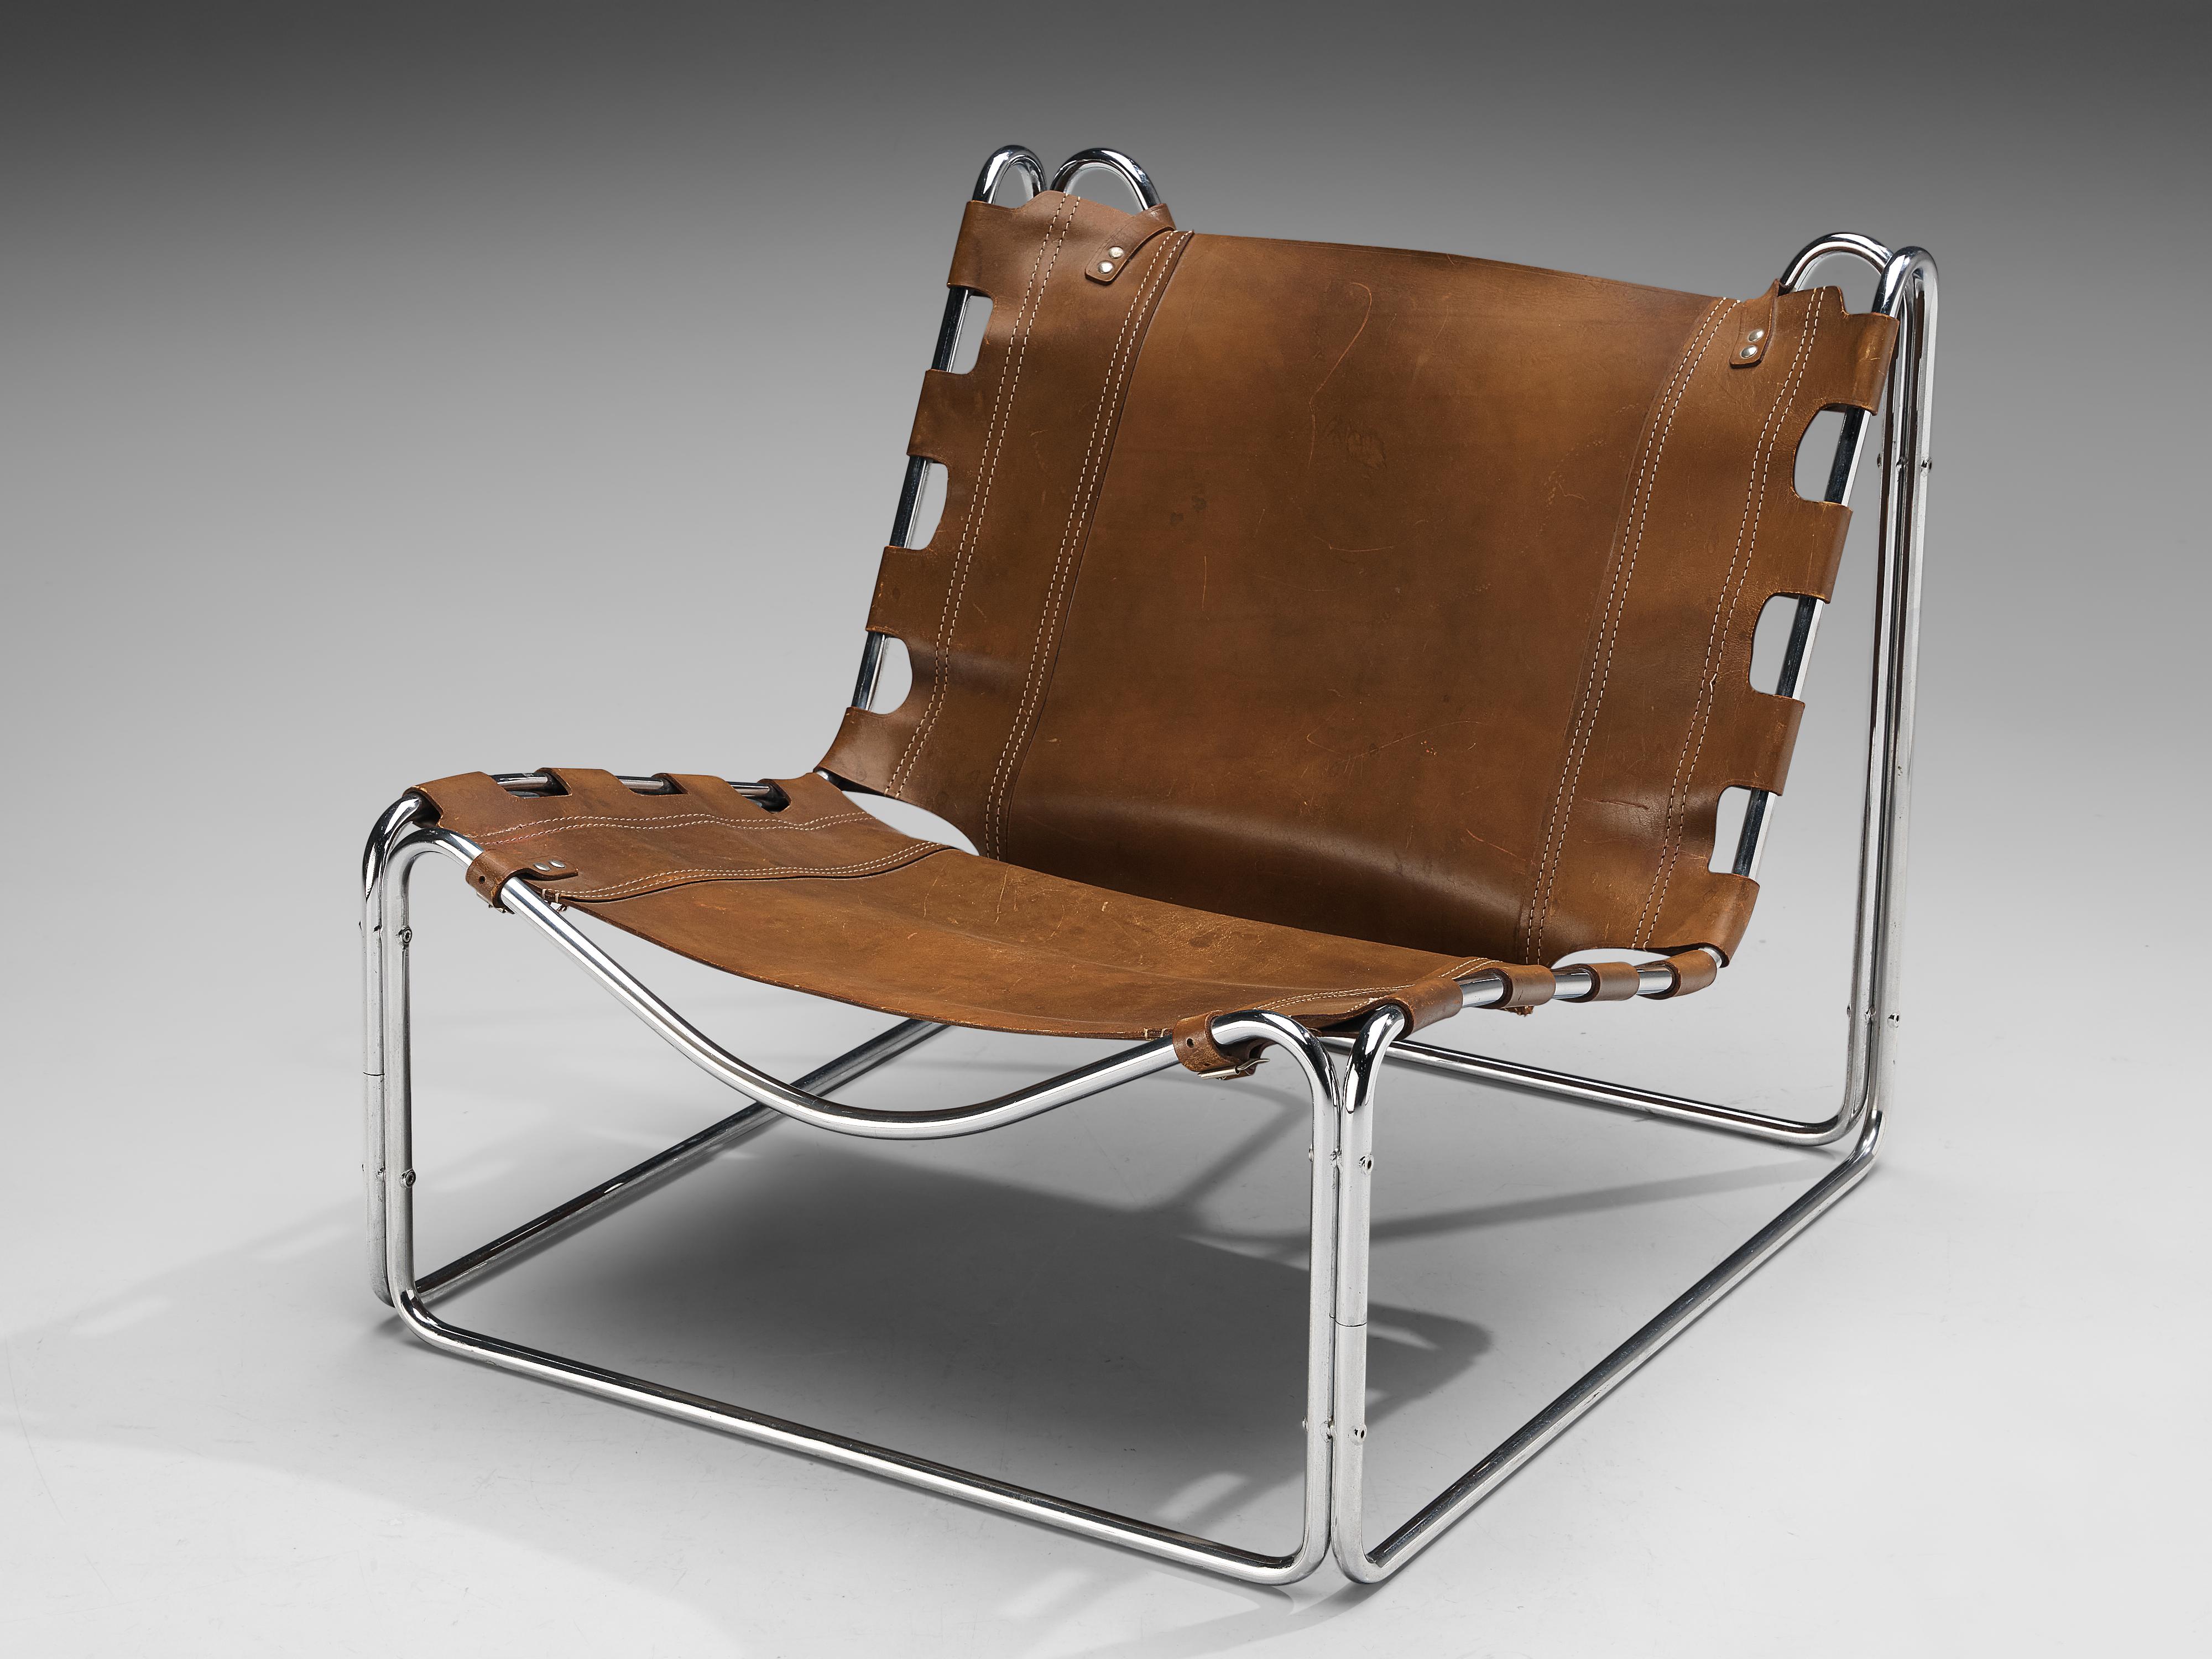 Pascal Mourgue for Steiner, lounge chair model ‘ Fabio’, leather, steel, France, 1960s

Wonderful design piece of Pascal Mourgue from 1960s. Mourgue created a comfortable lounge chair that bears multiple visual features. Four separate elements of